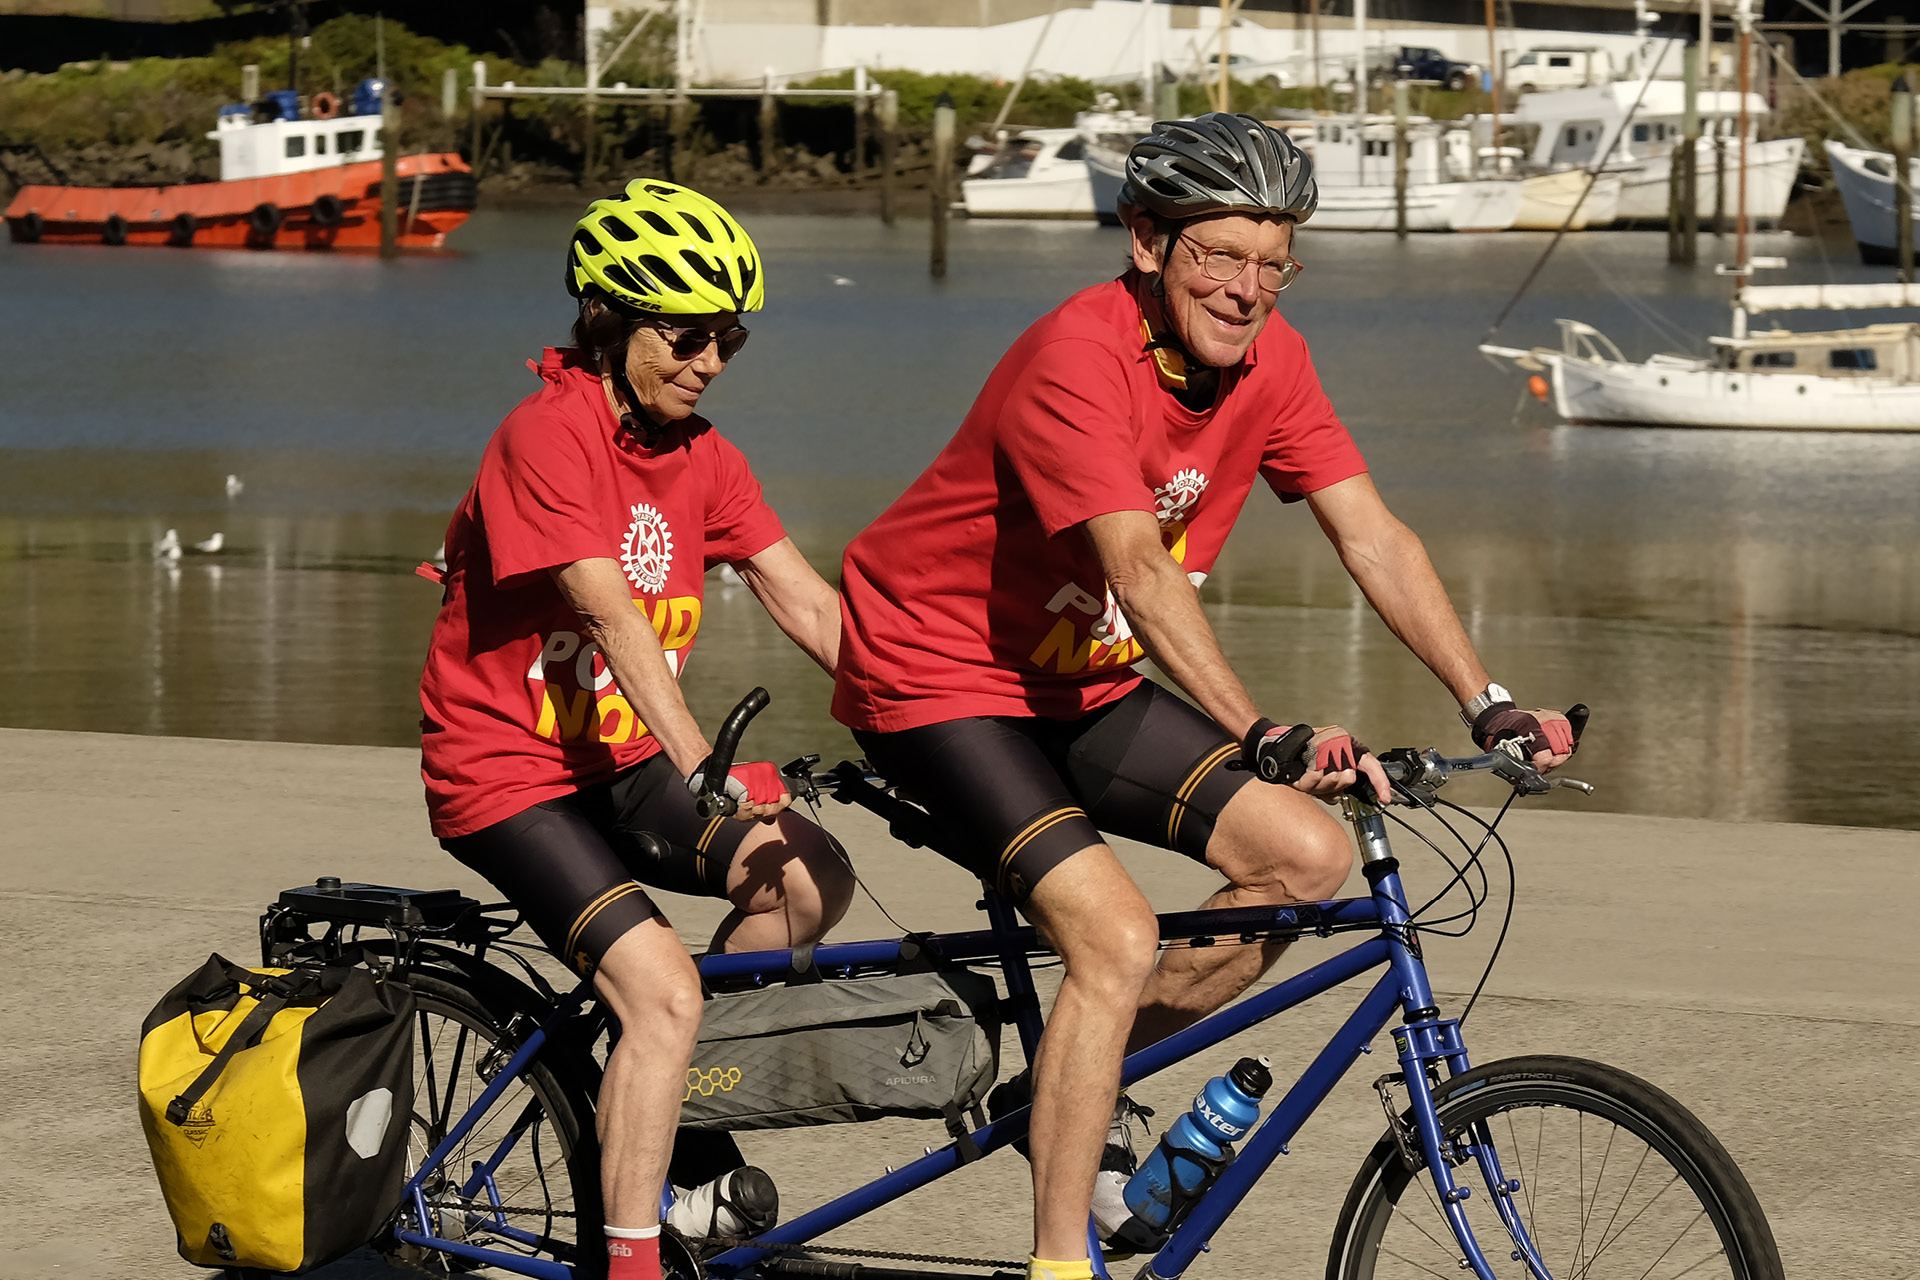 Pedal power drives passion for polio fundraising across the Nullarbor